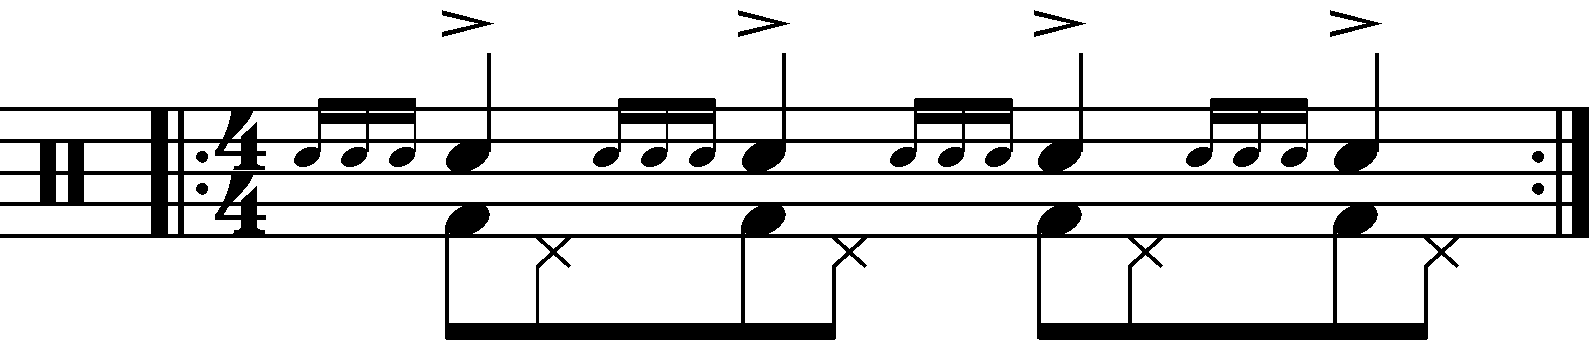 A Four Stroke Ruff with eighth note feet